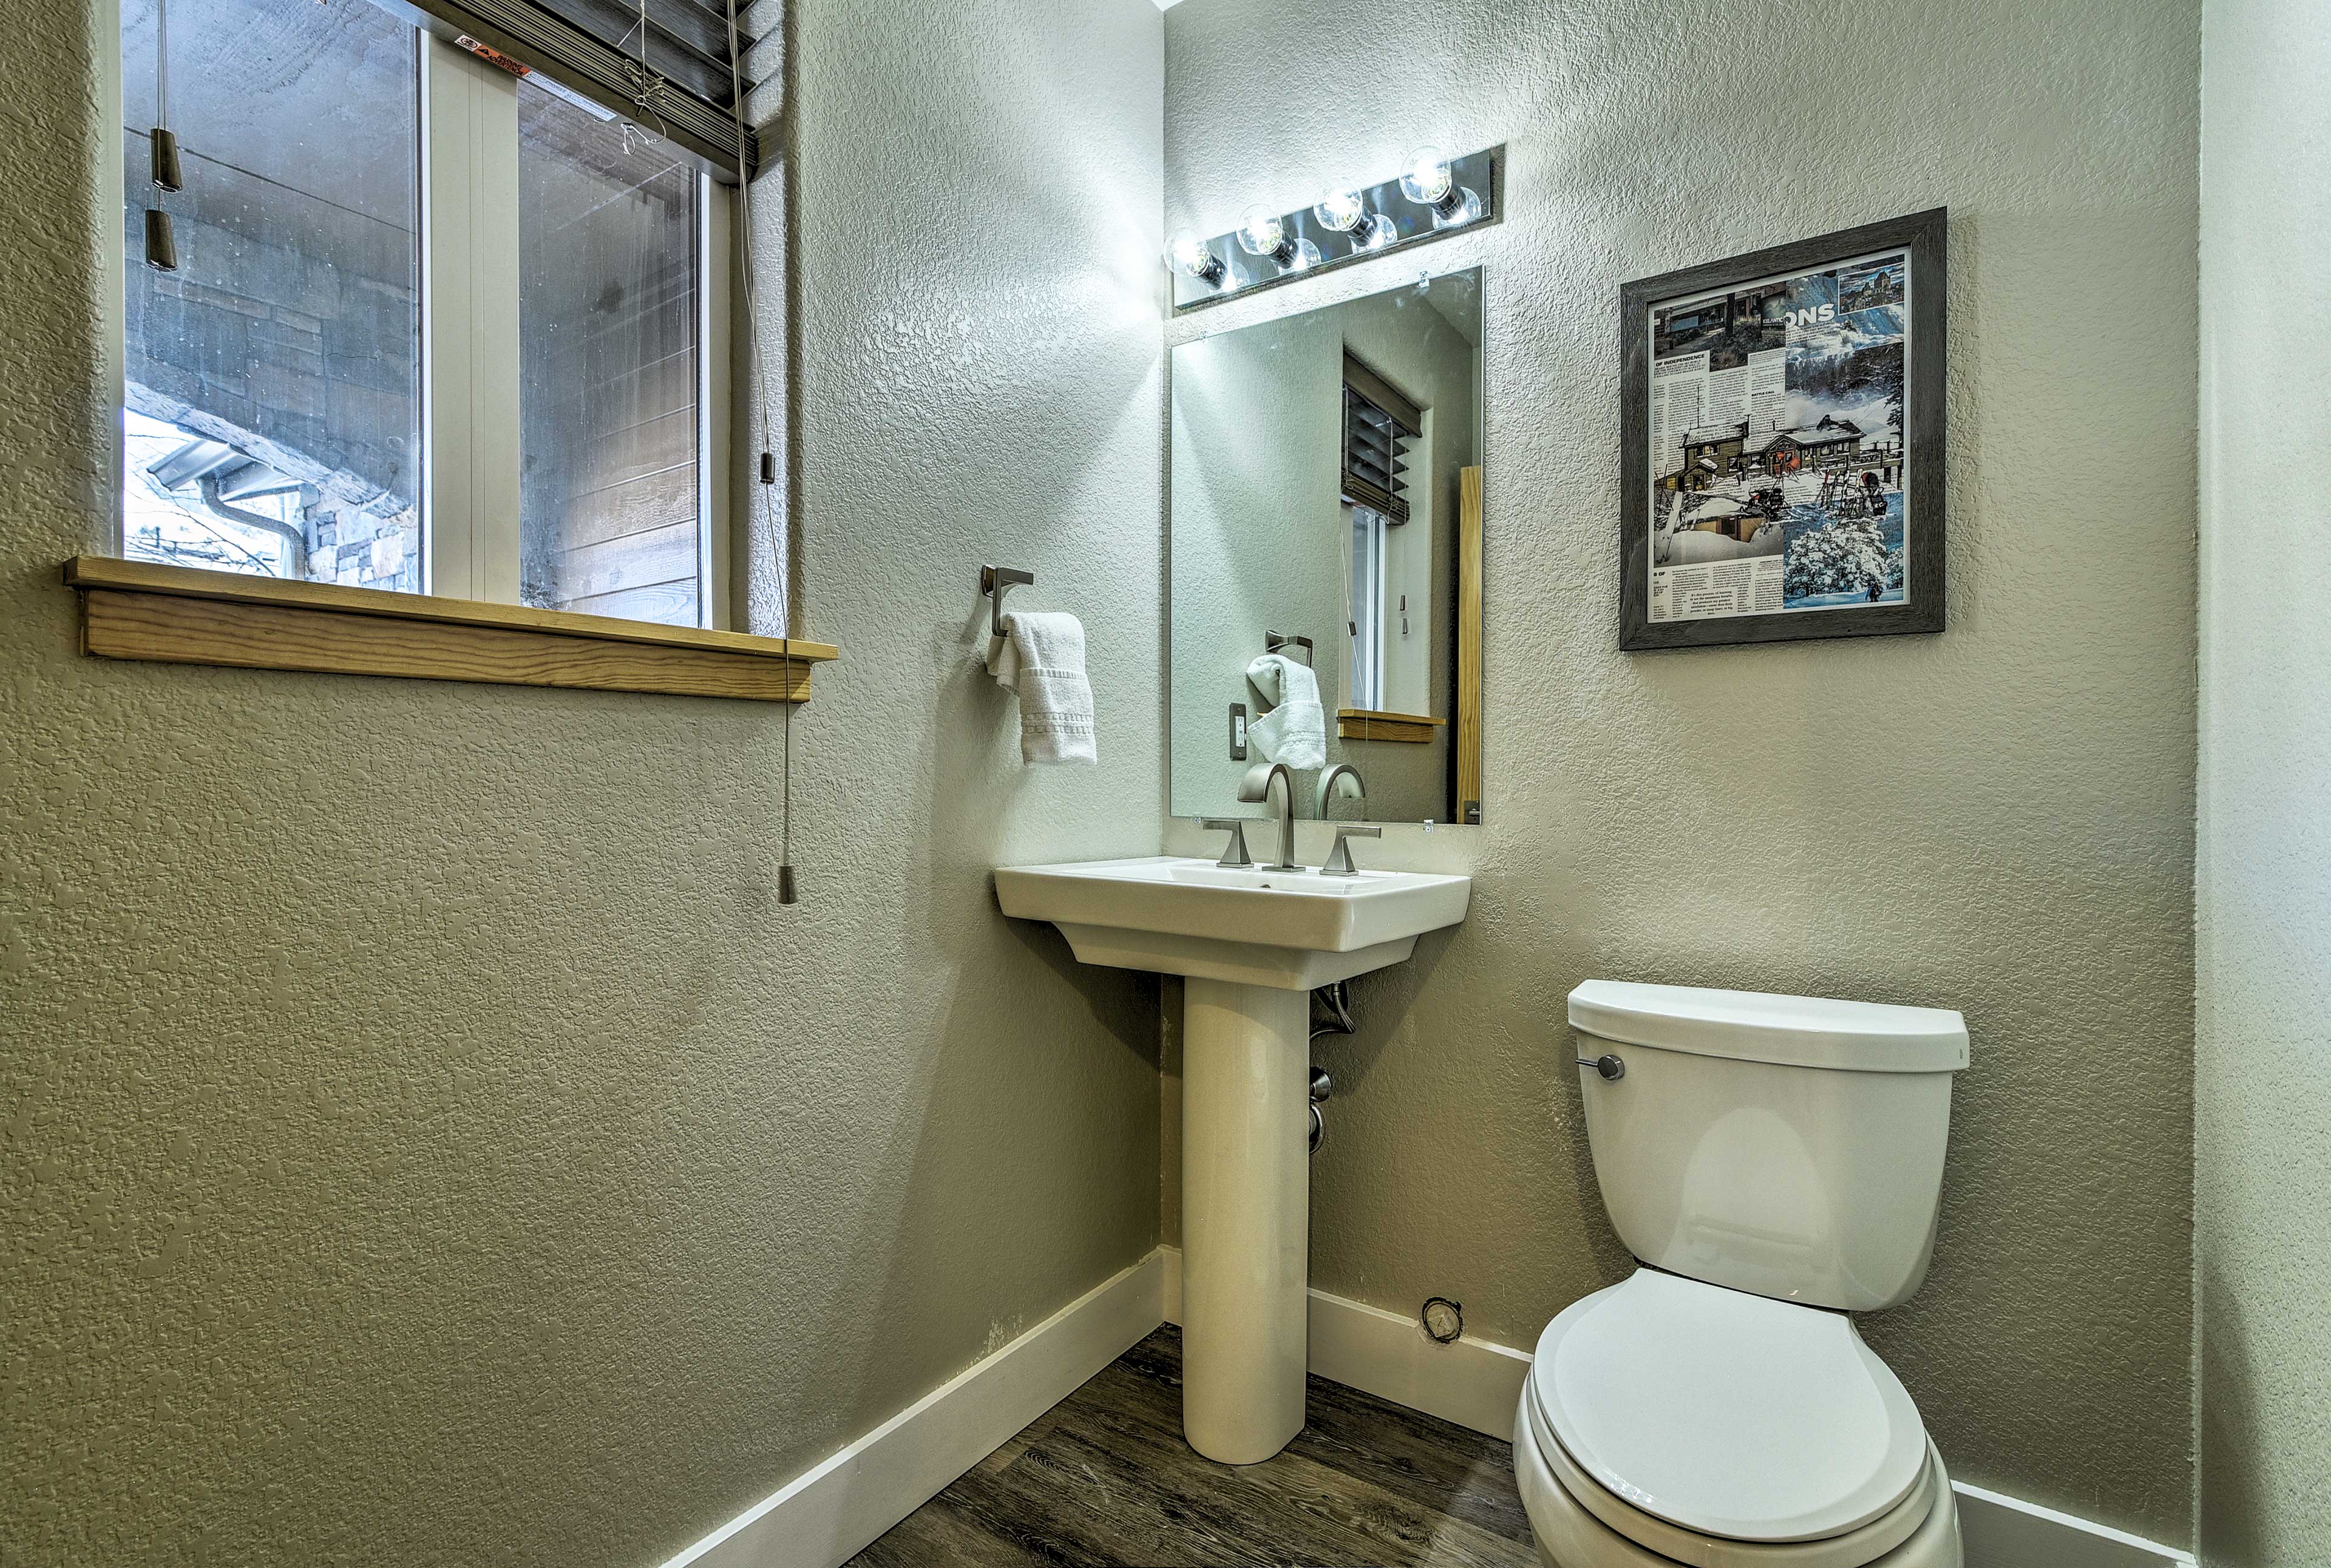 The half bath provides extra space to accommodate your whole group.